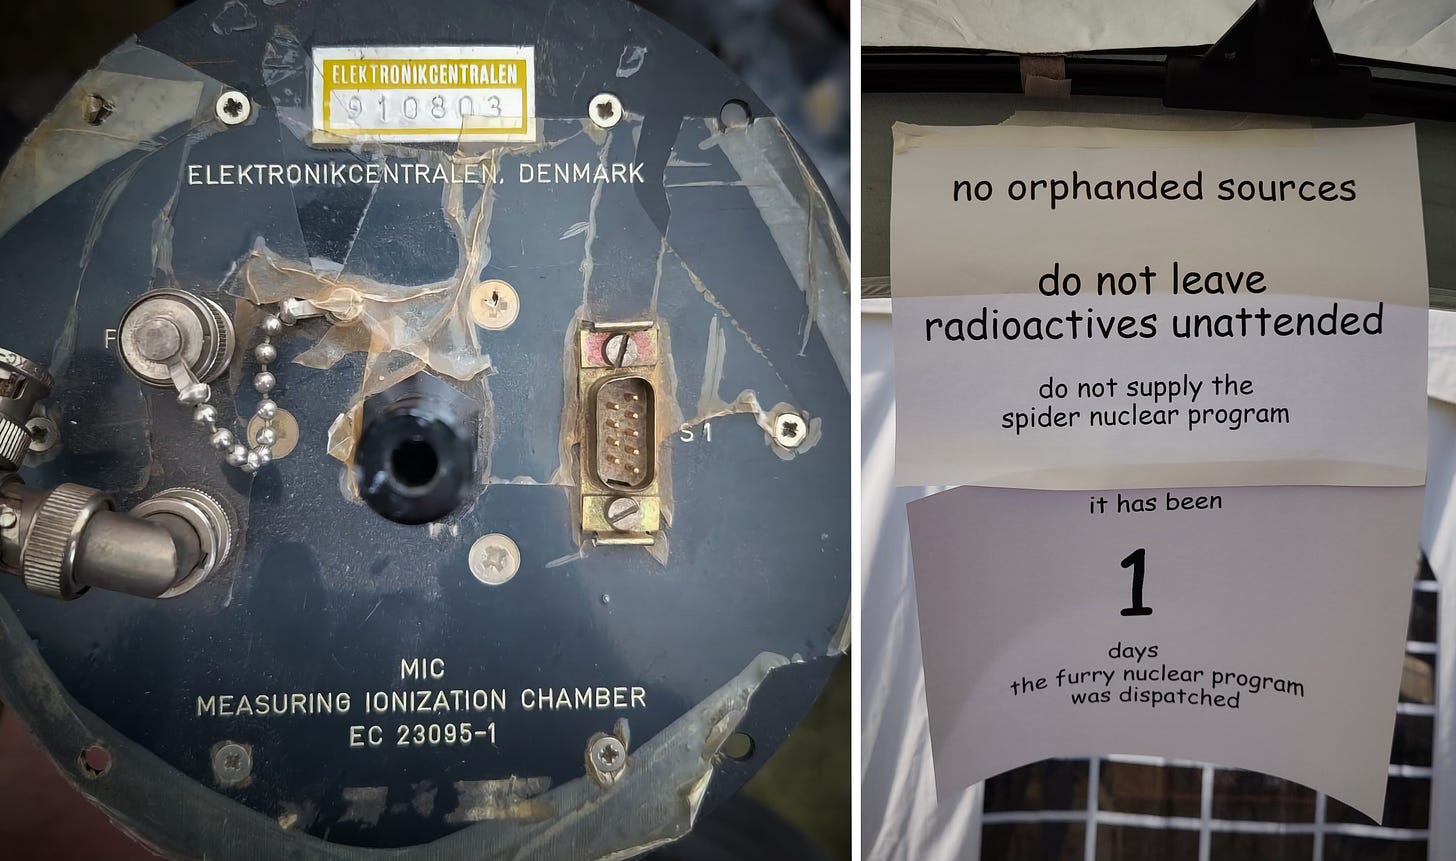 A photograph of the ionising chamber which contained radiation and assign asking people to kindly not supply the spider new clip program with leftover radioactive material. It also says it has been one day since the furry nuclear program was dispatched.